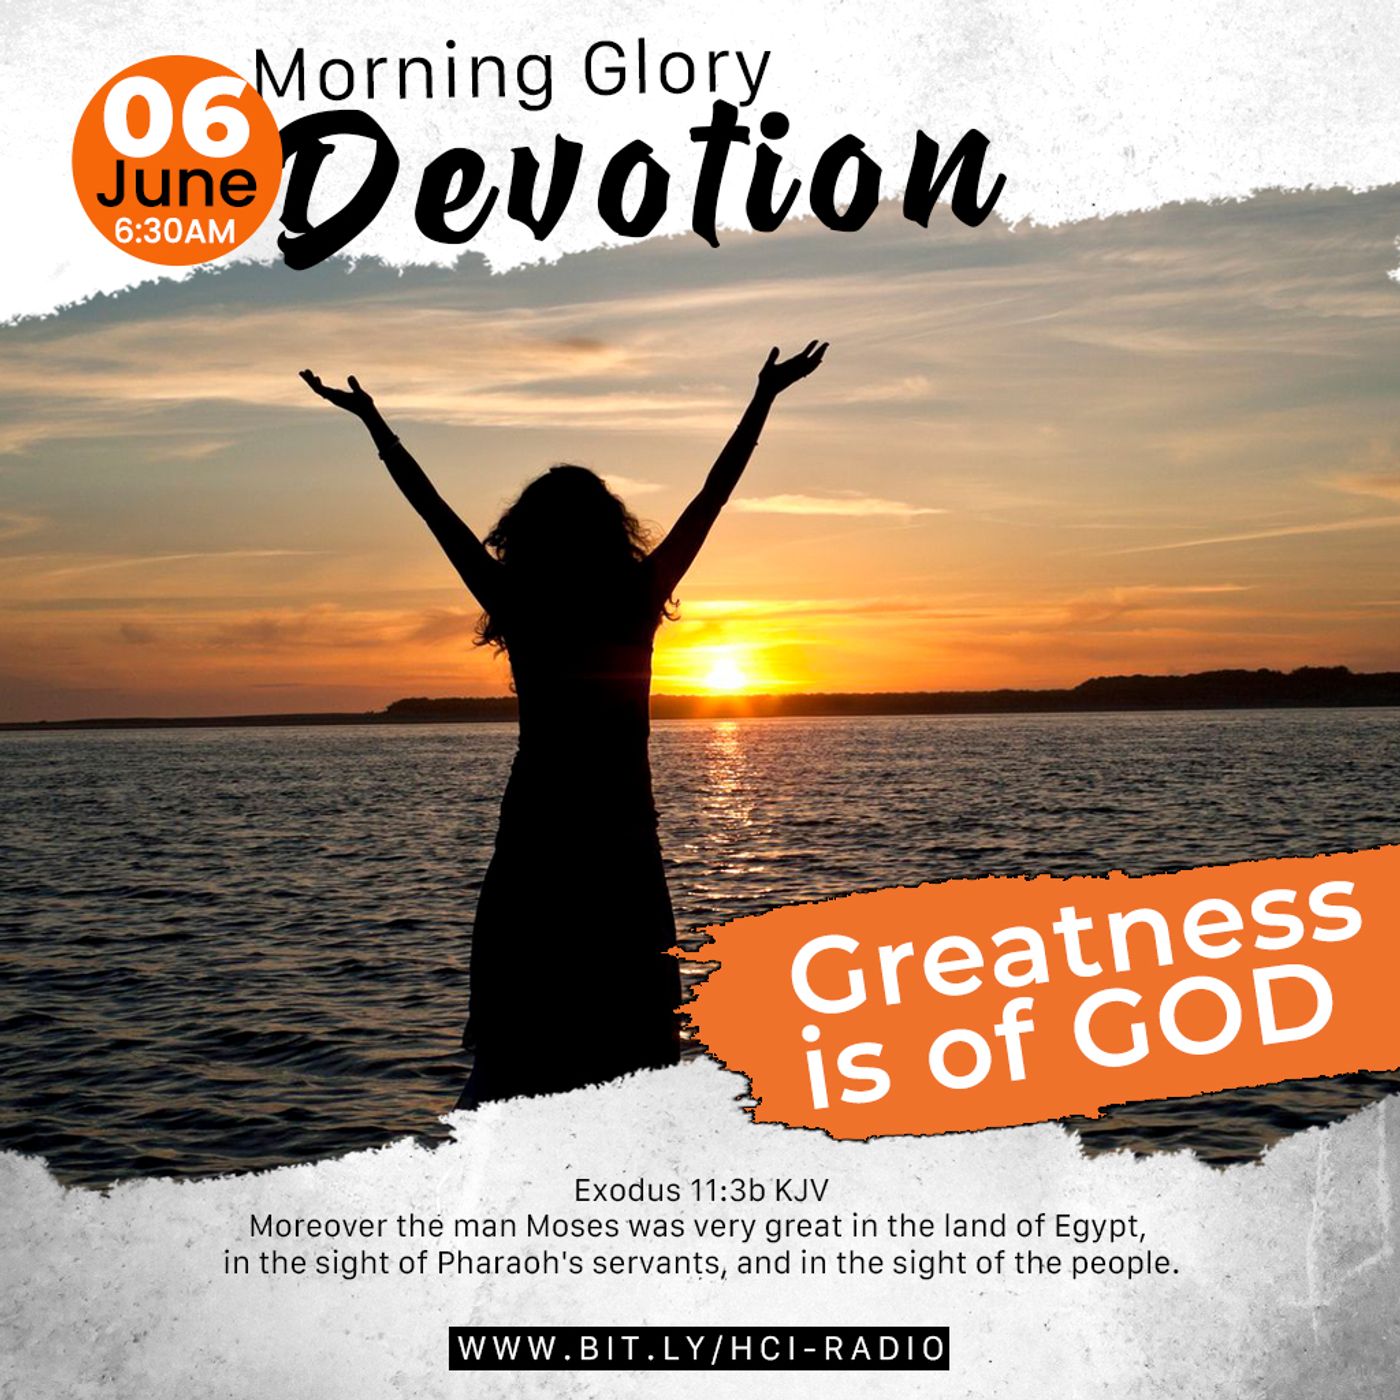 MGD: Greatness is of God